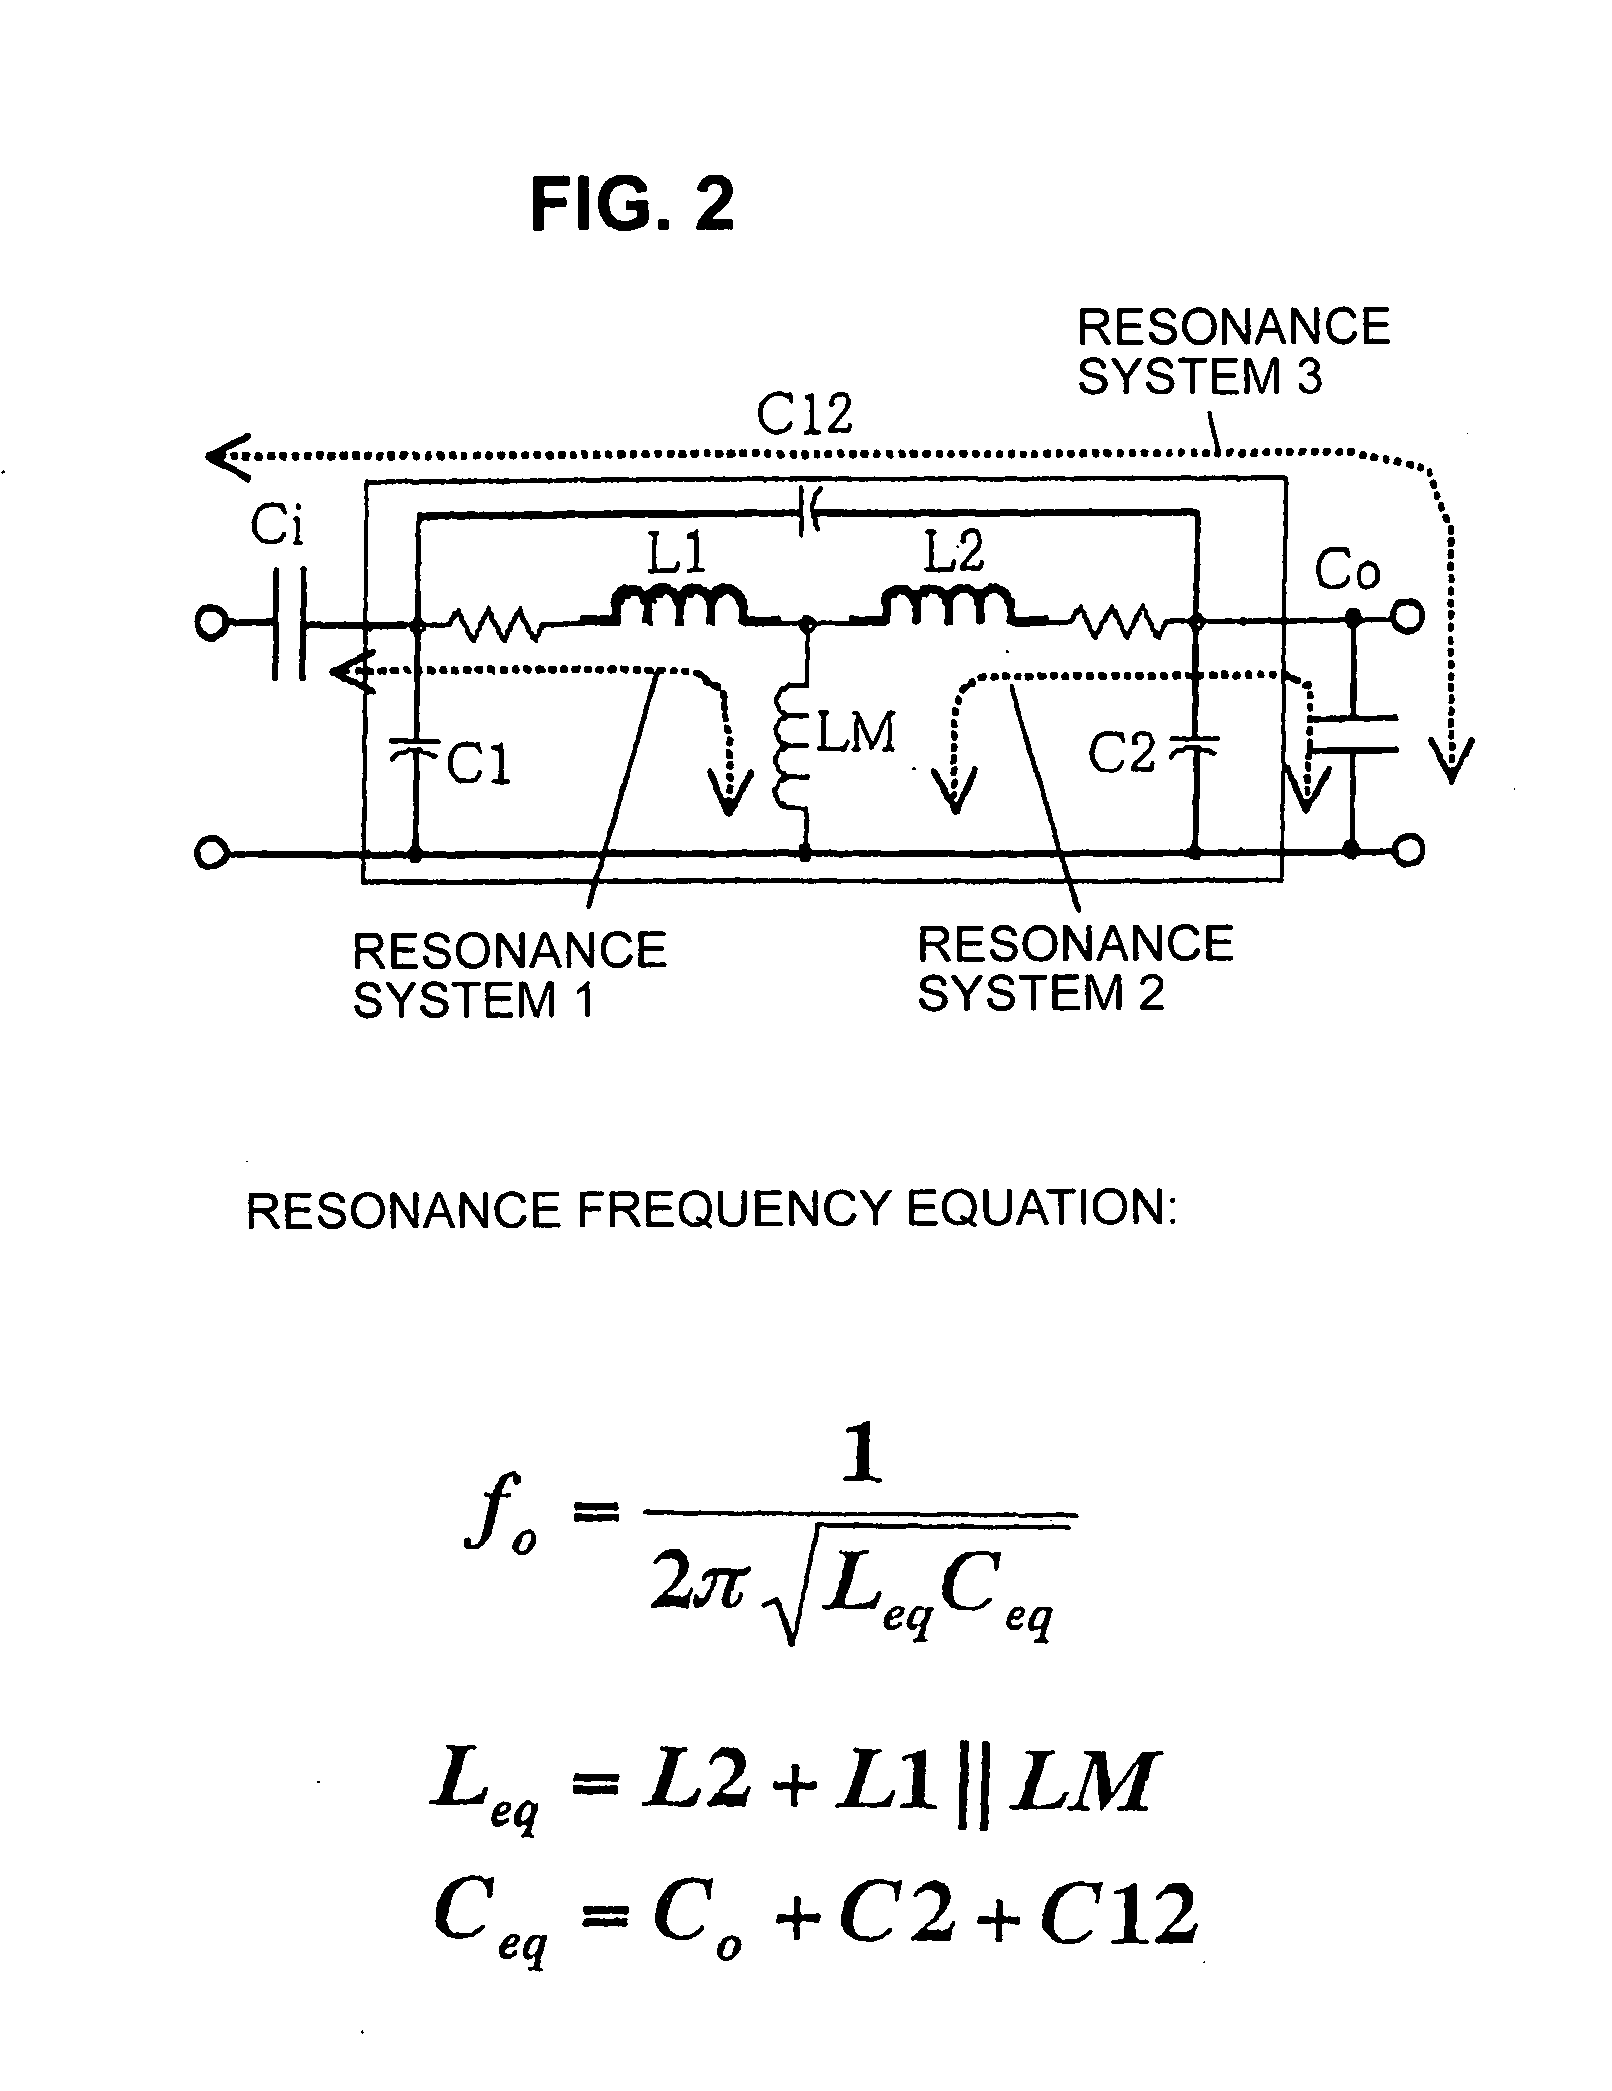 Electrically insulated switching element drive circuit